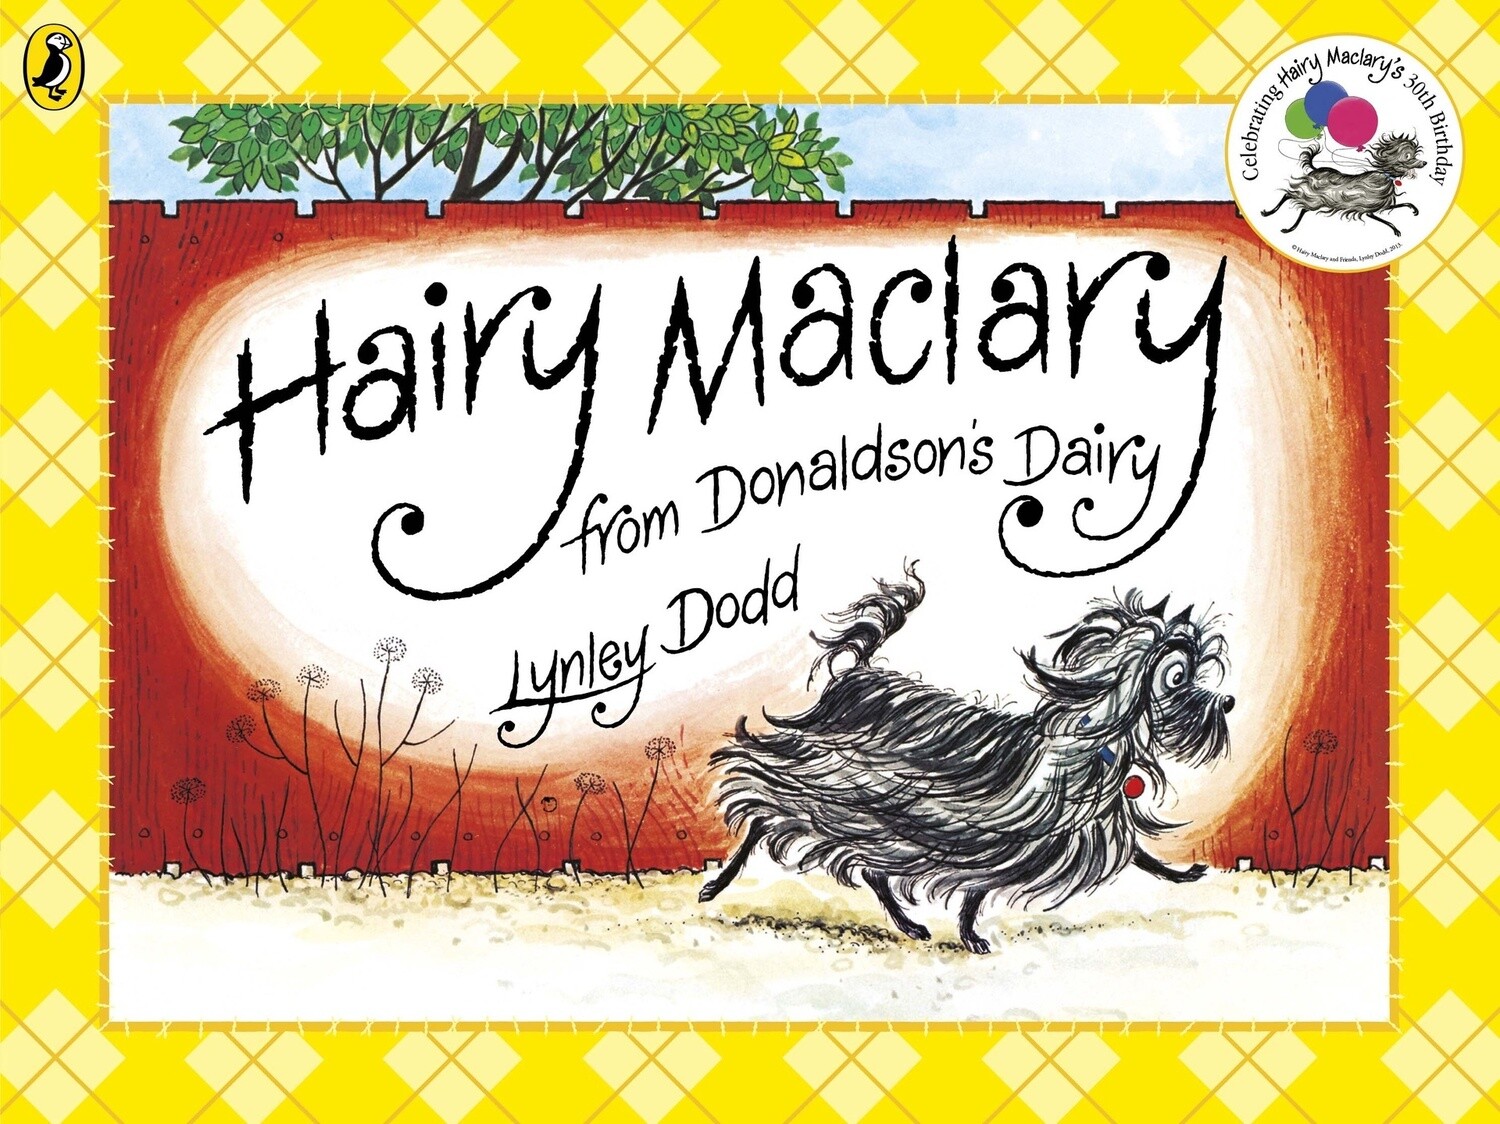 Hairy Maclary from Donaldson's Dairy by Lynley Dodd (USG)